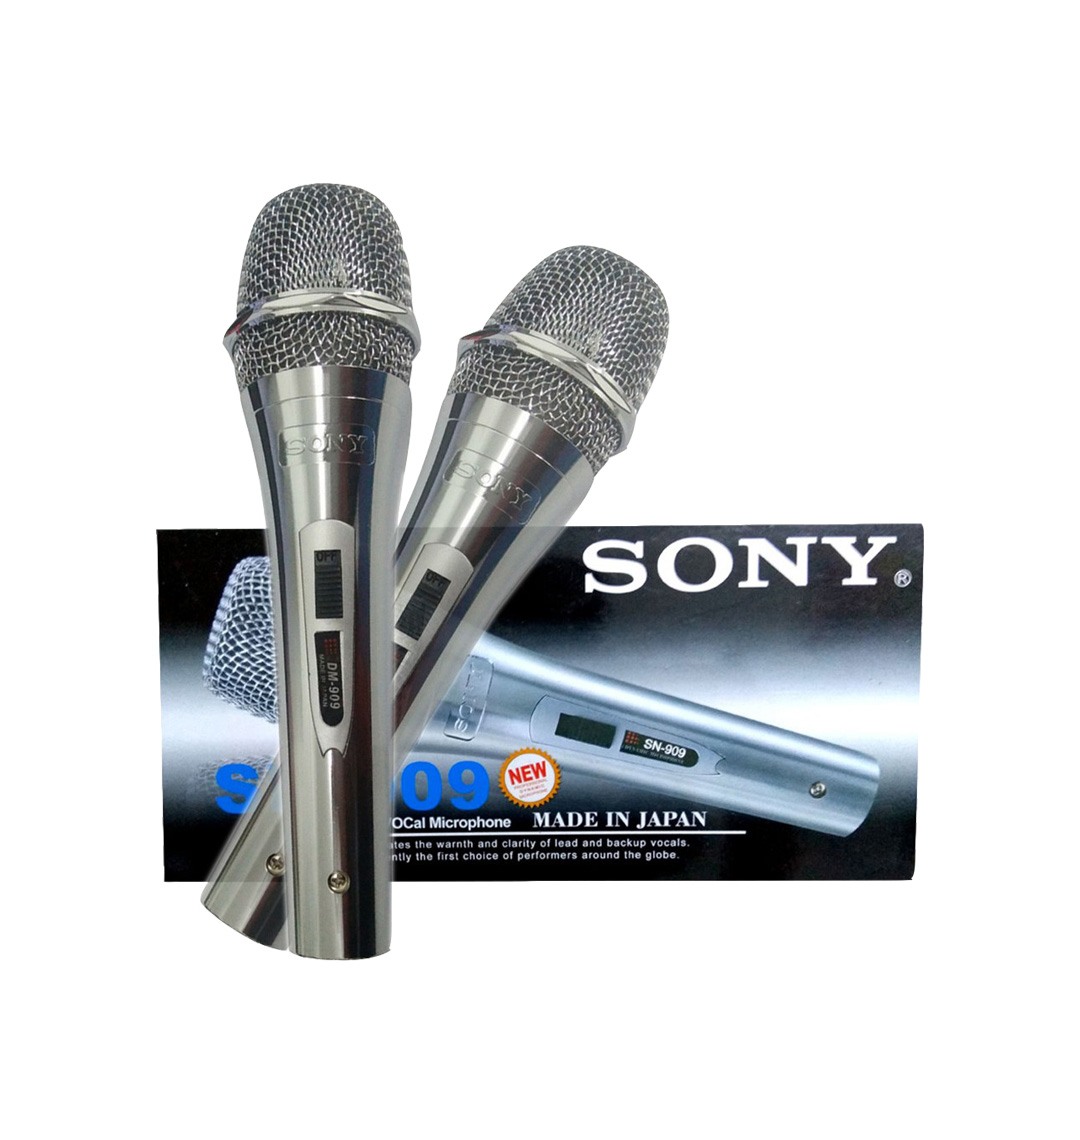 Sony Legendary Vocal Microphone SN-909